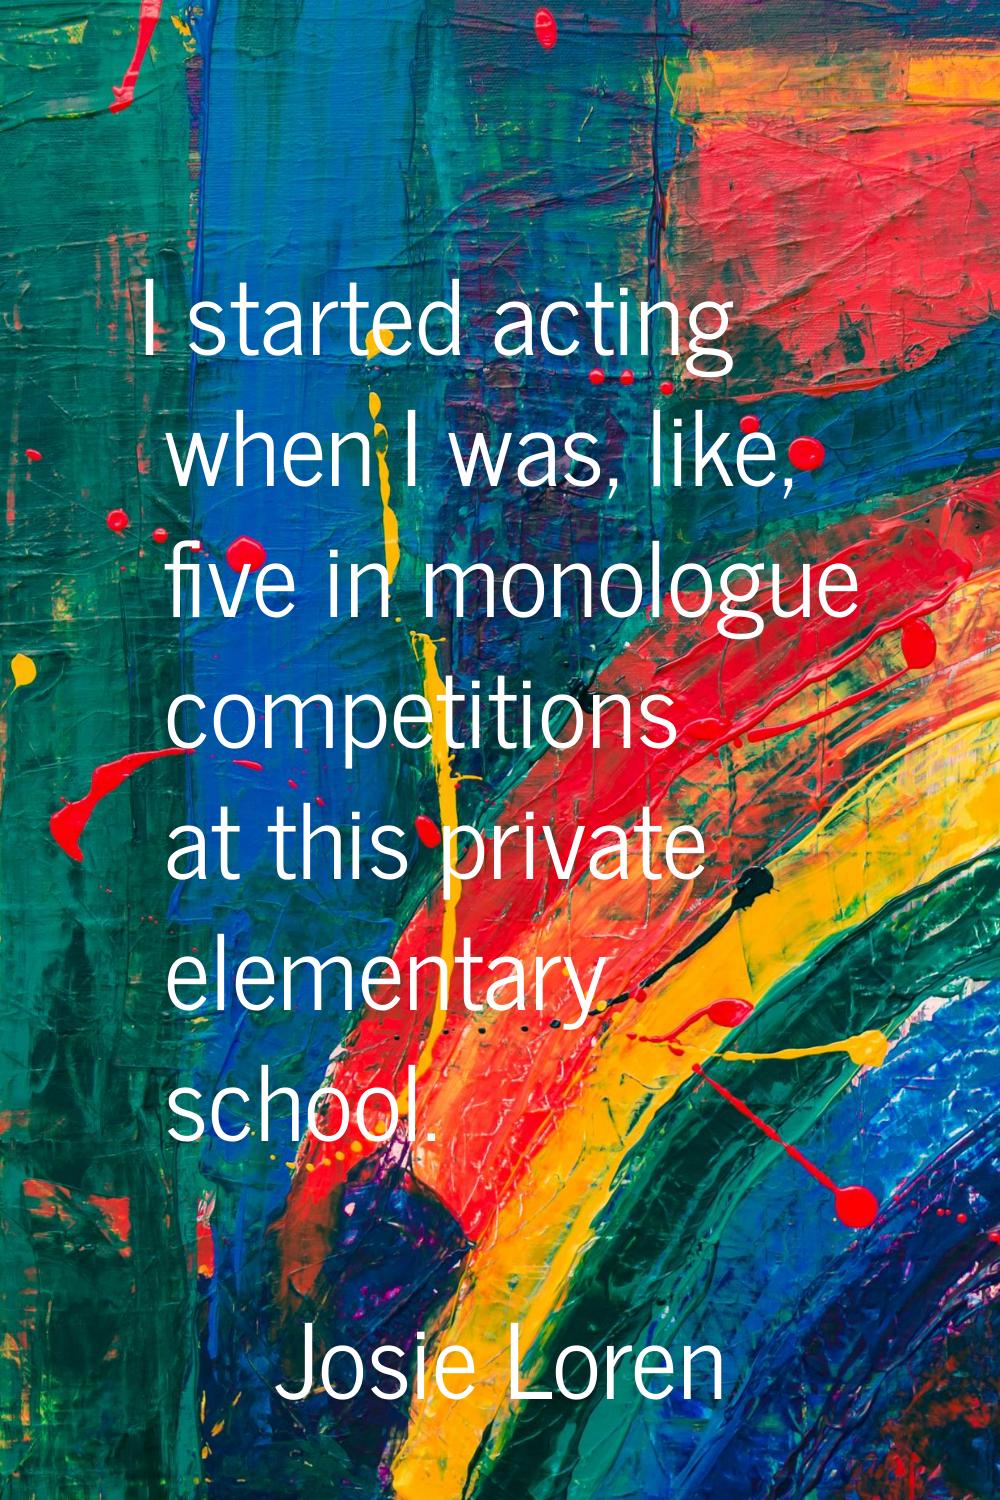 I started acting when I was, like, five in monologue competitions at this private elementary school